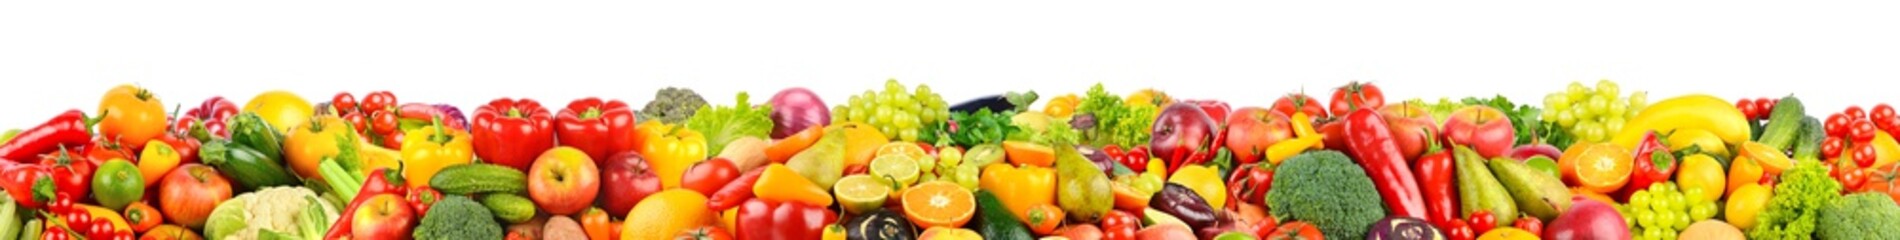 Very wide panoramic photo vegetables and fruits isolated on white